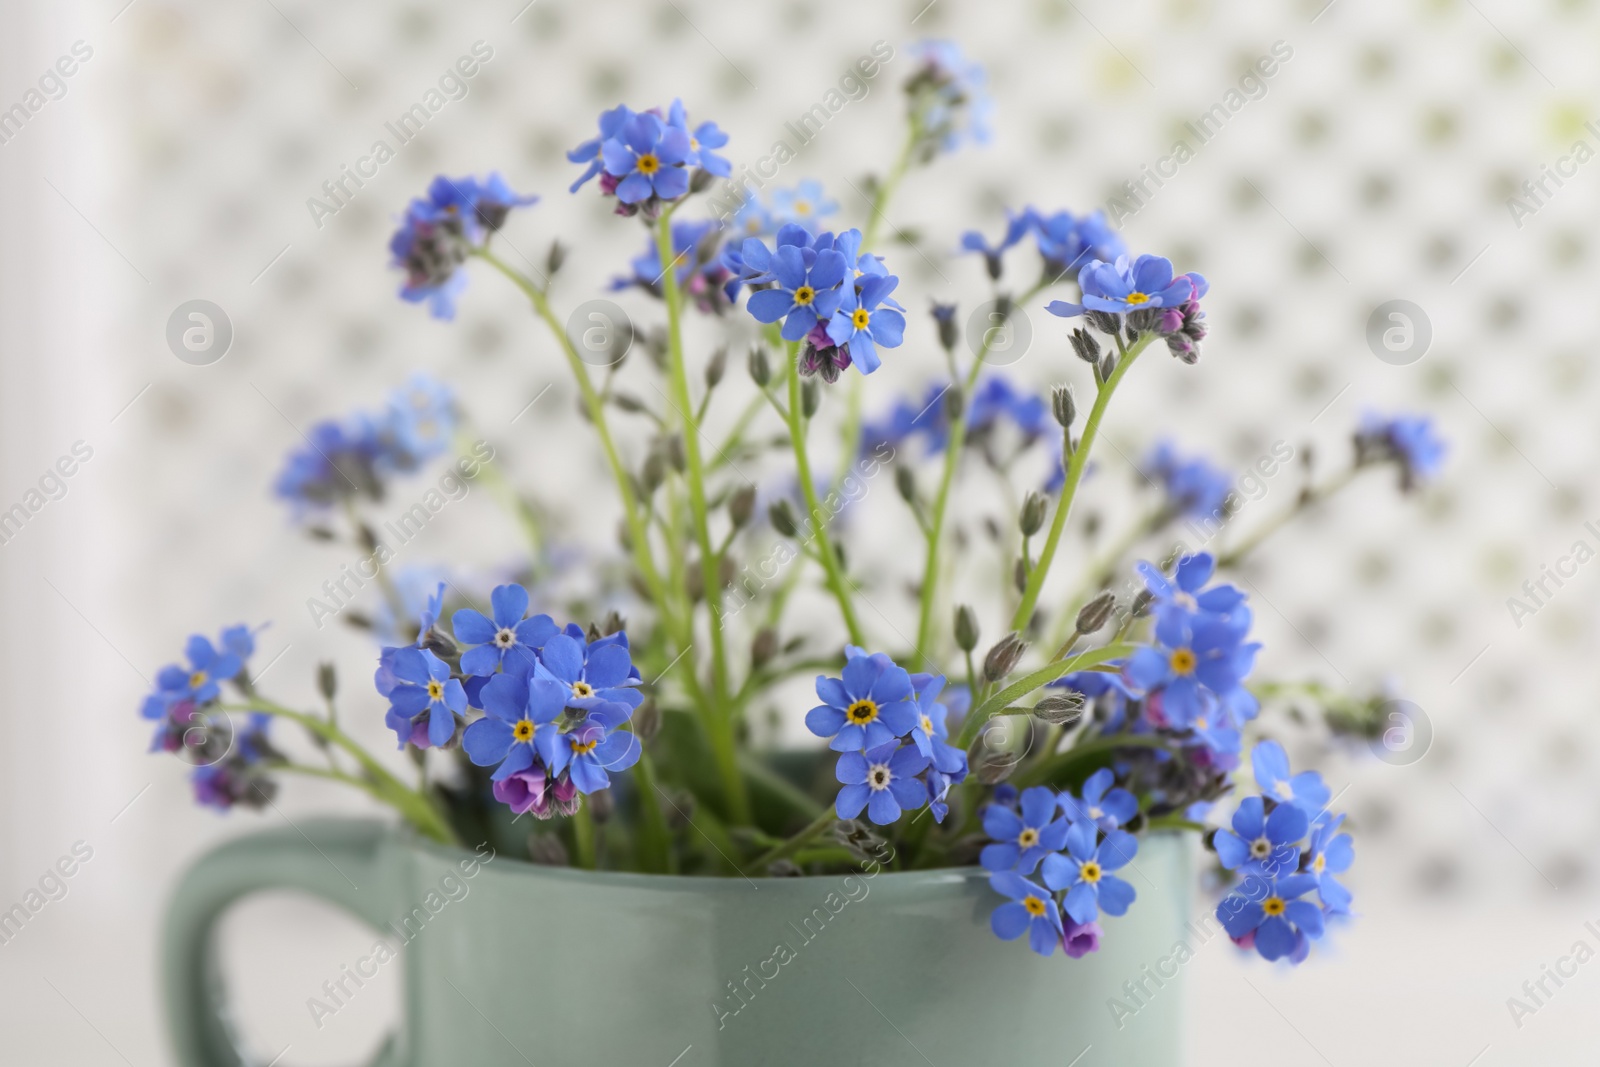 Photo of Beautiful blue forget-me-not flowers in cup against blurred background, closeup